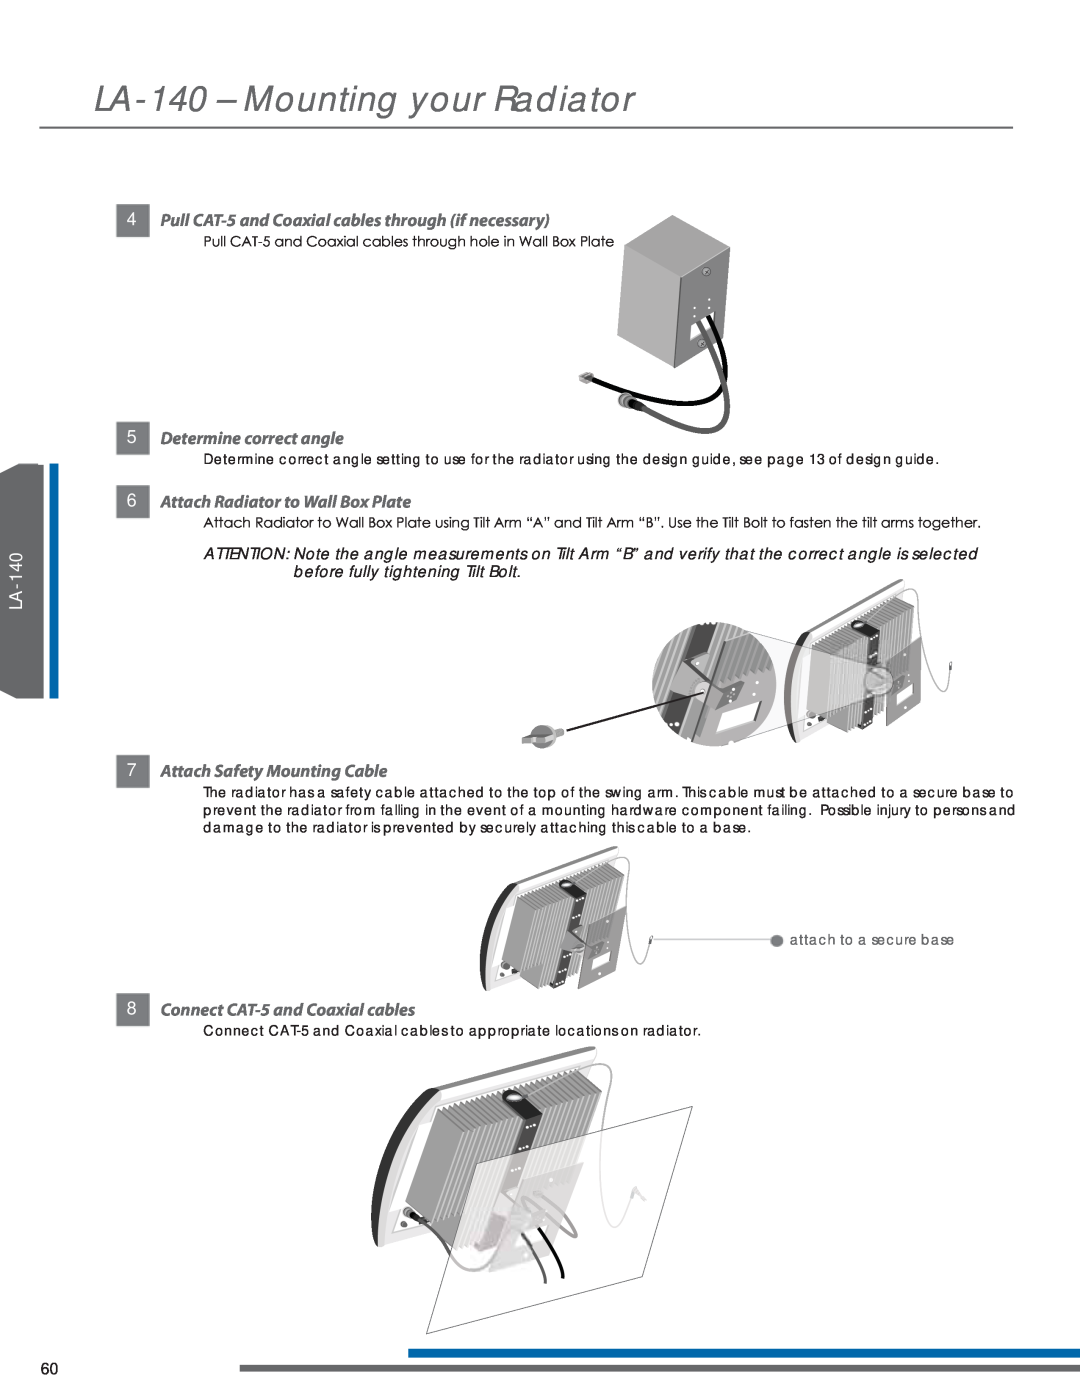 Listen Technologies LR-44 LA-140- Mounting your Radiator, 5Determine correct angle, 6Attach Radiator to Wall Box Plate 